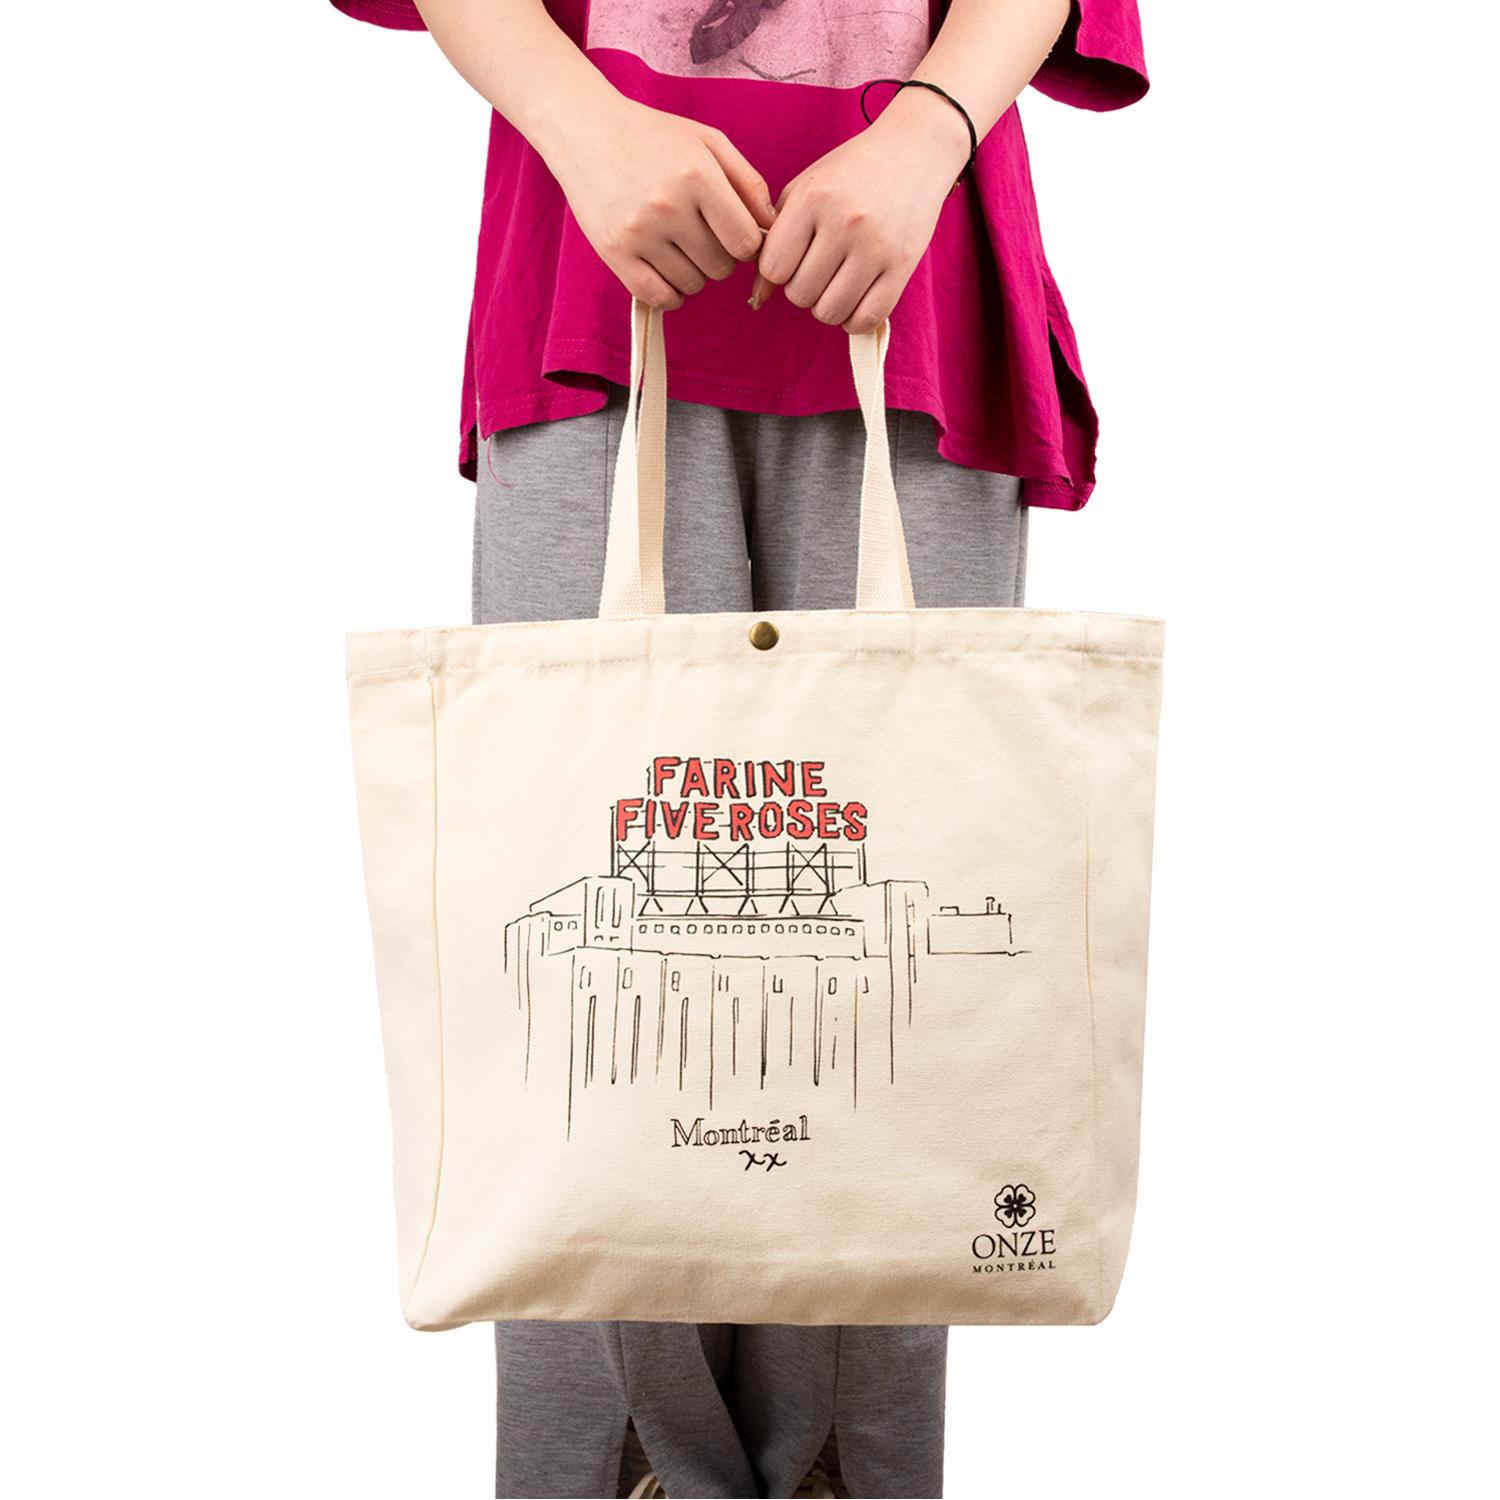 Soma Package Ltd Unveils Cutting-Edge Innovations in Canvas Tote Bags